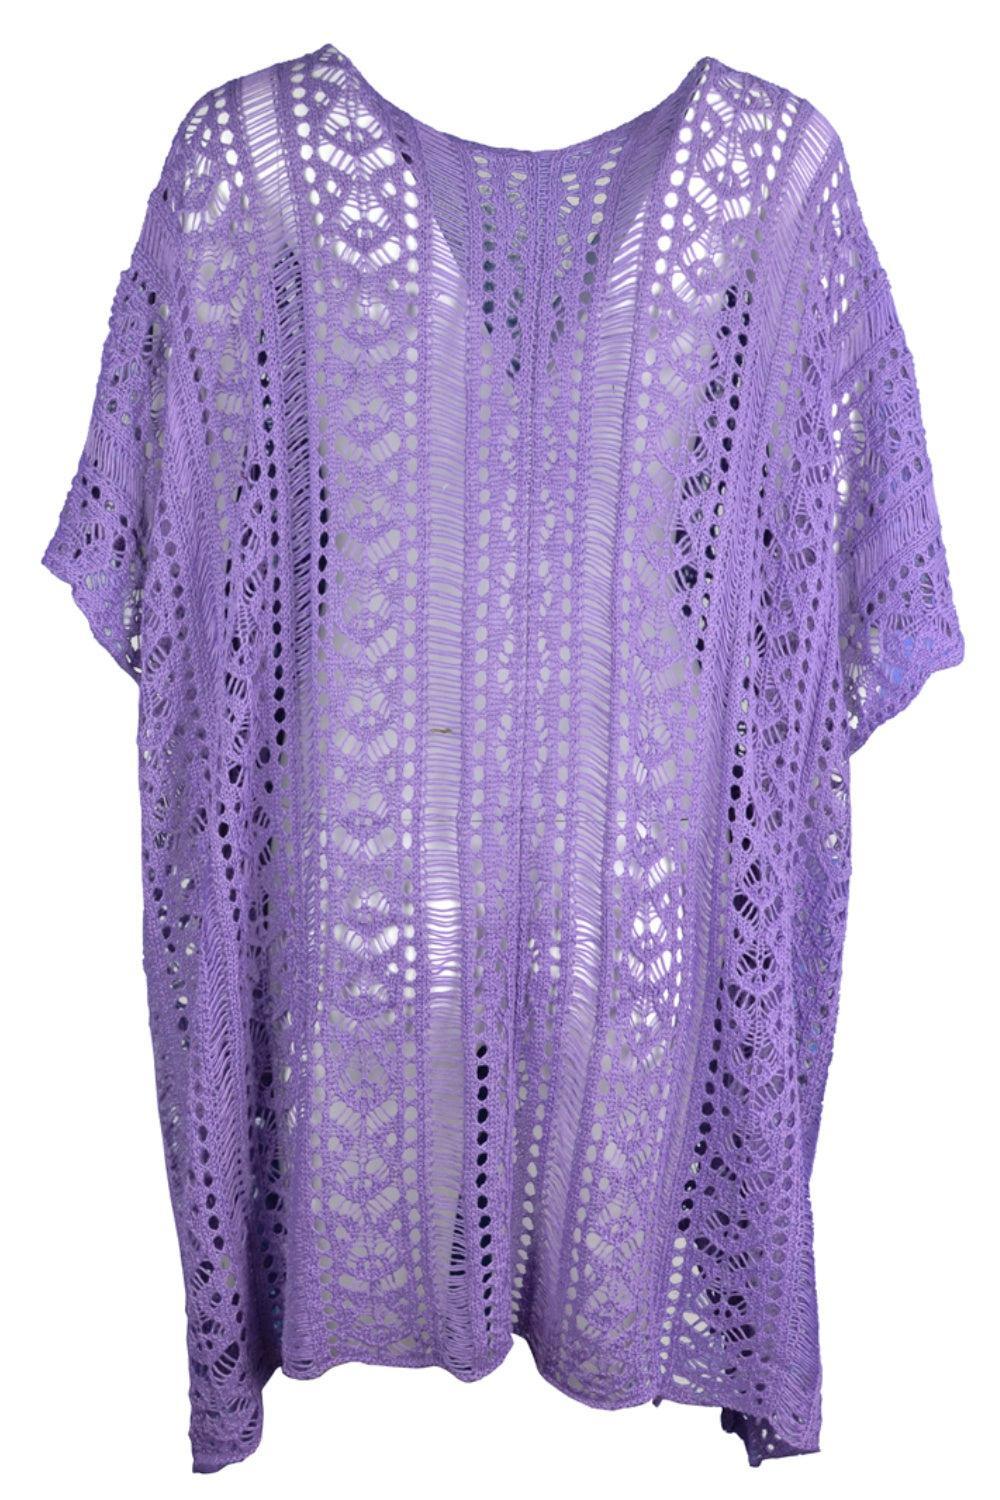 a purple top with lacy crochet on it